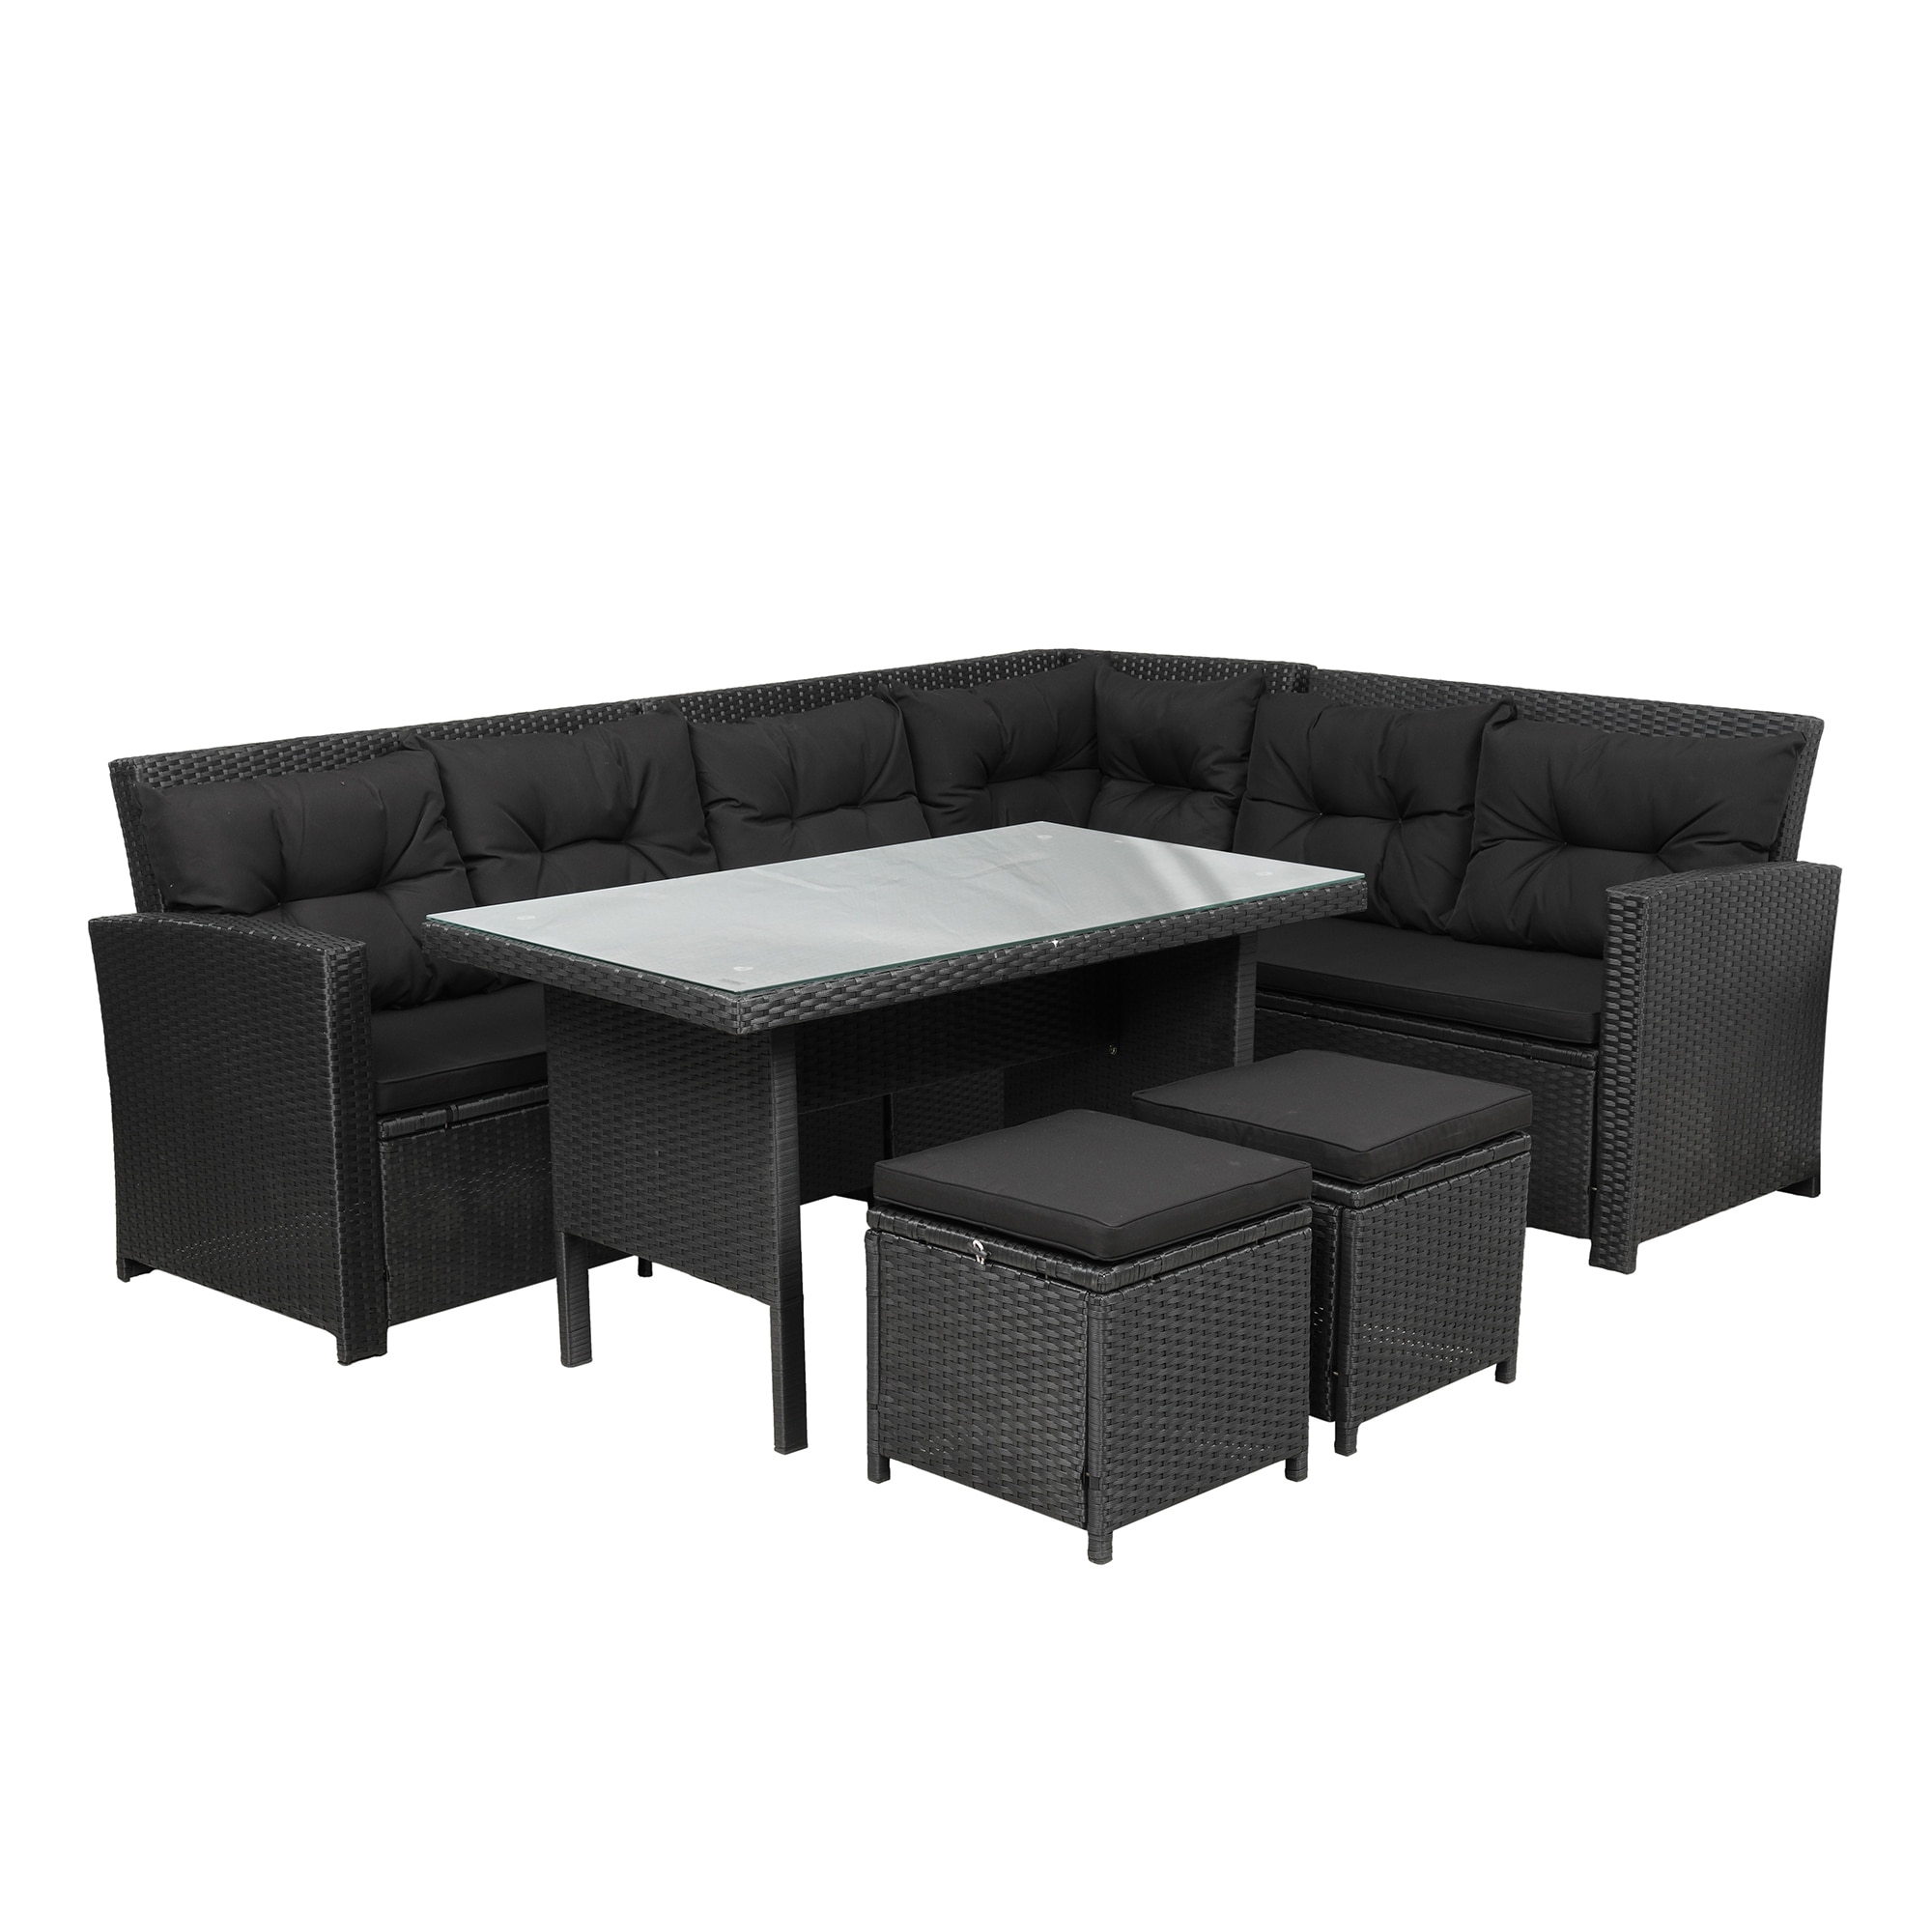 Clihome 6-piece Outdoor Sectional Sofa With Glass Table